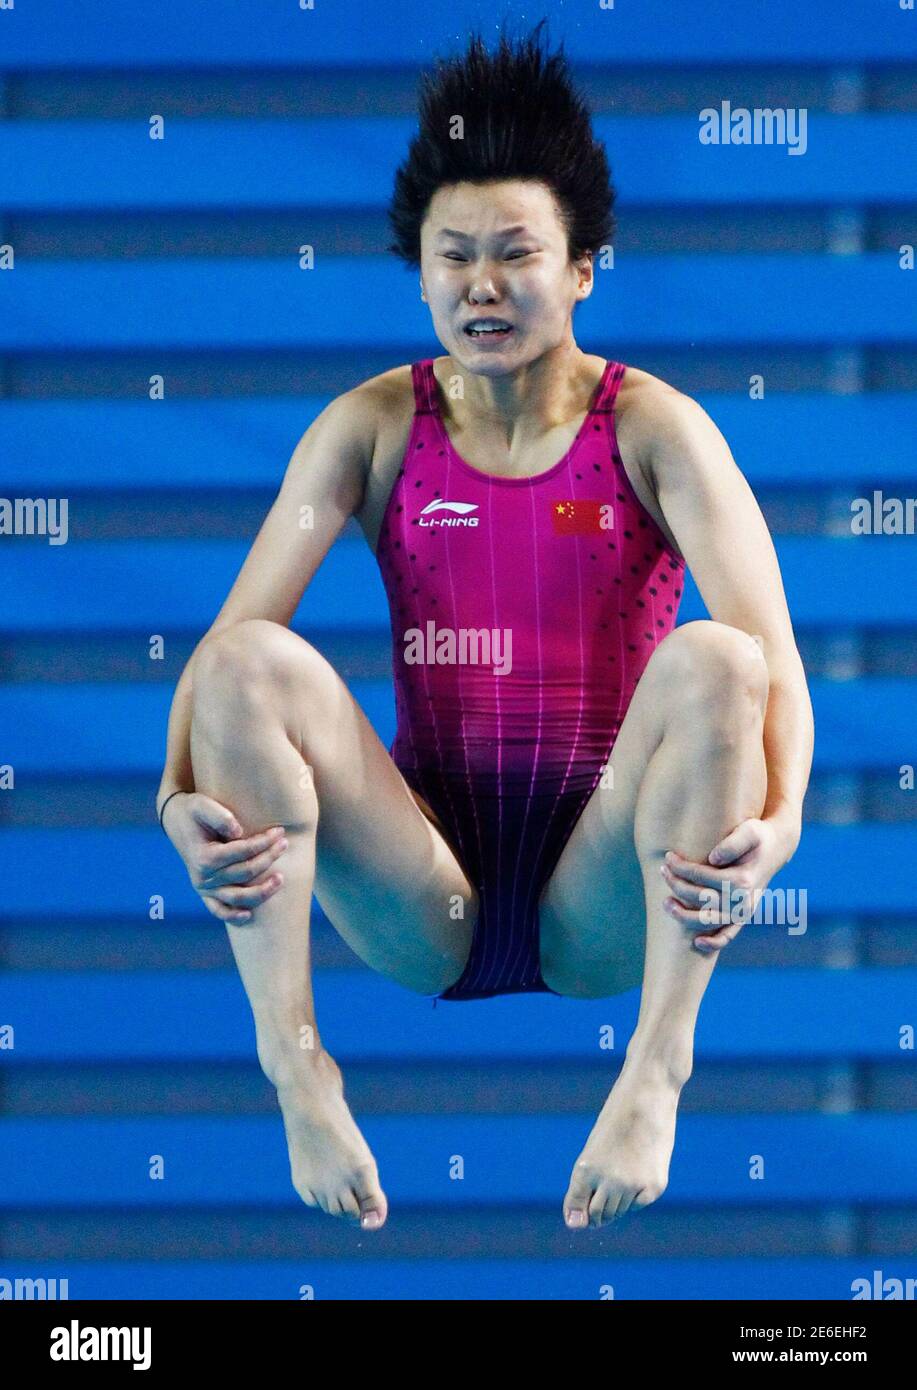 Shi Tingmao of China  competes in the women's 3m springboard diving final at the 16th Asian Games in Guangzhou, Guangdong province, November 26, 2010.  REUTERS/Jason Lee (CHINA  - Tags: SPORT DIVING) Stock Photo